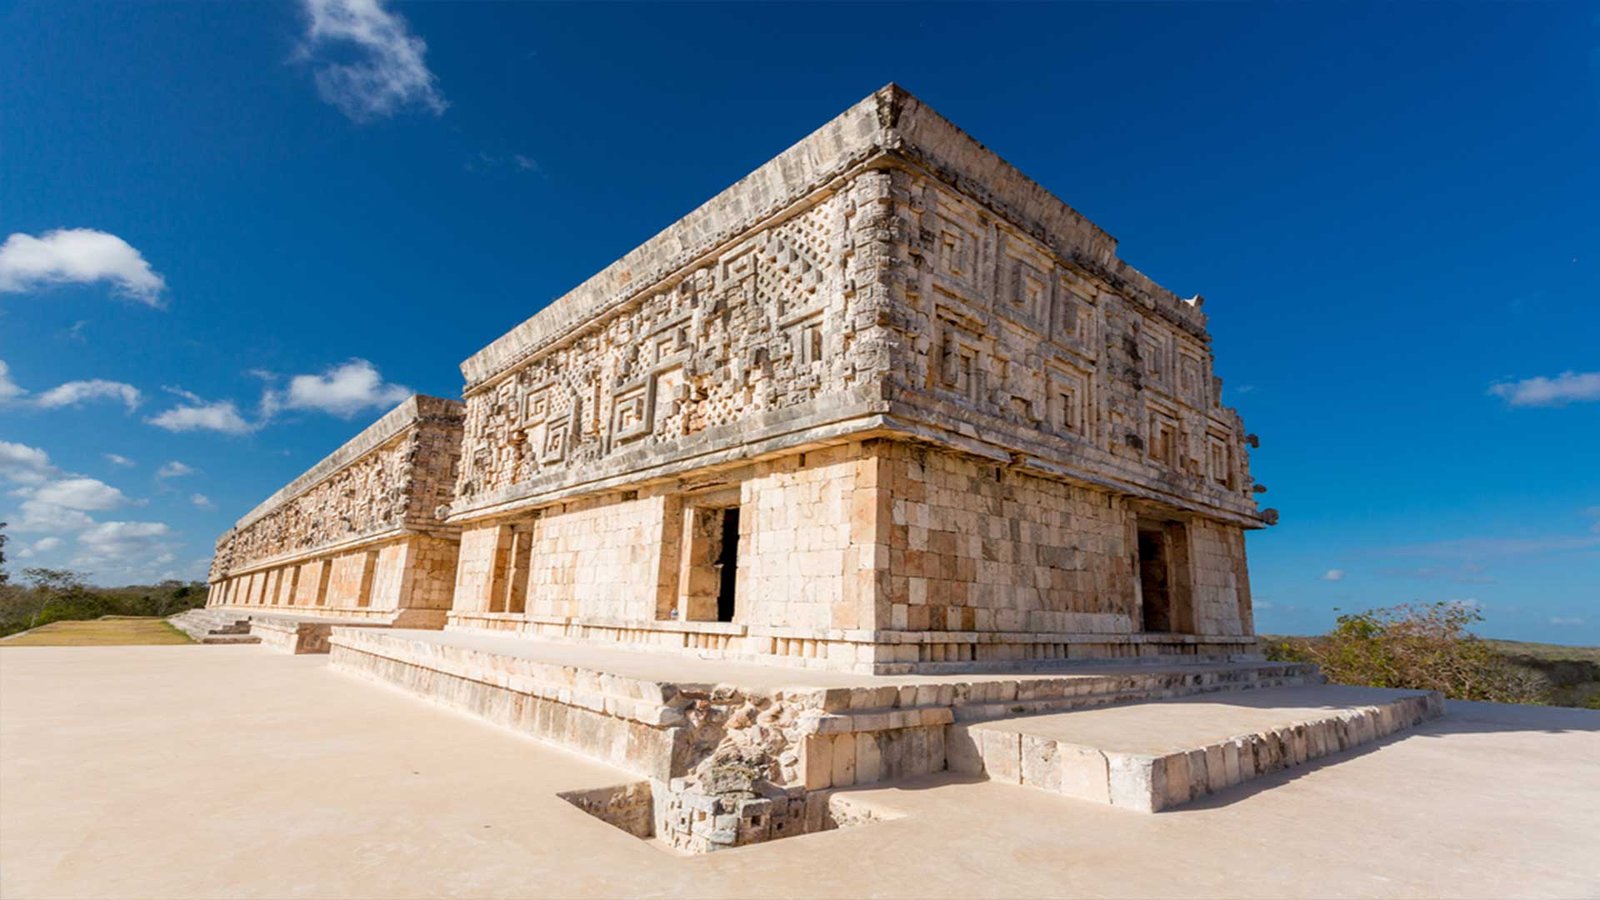 Amazing Vacation Travel Guide To Merida Mexico Zen Tripstar Dzibilchaltun Ruins Great Museum of the Maya World Museum of the City o